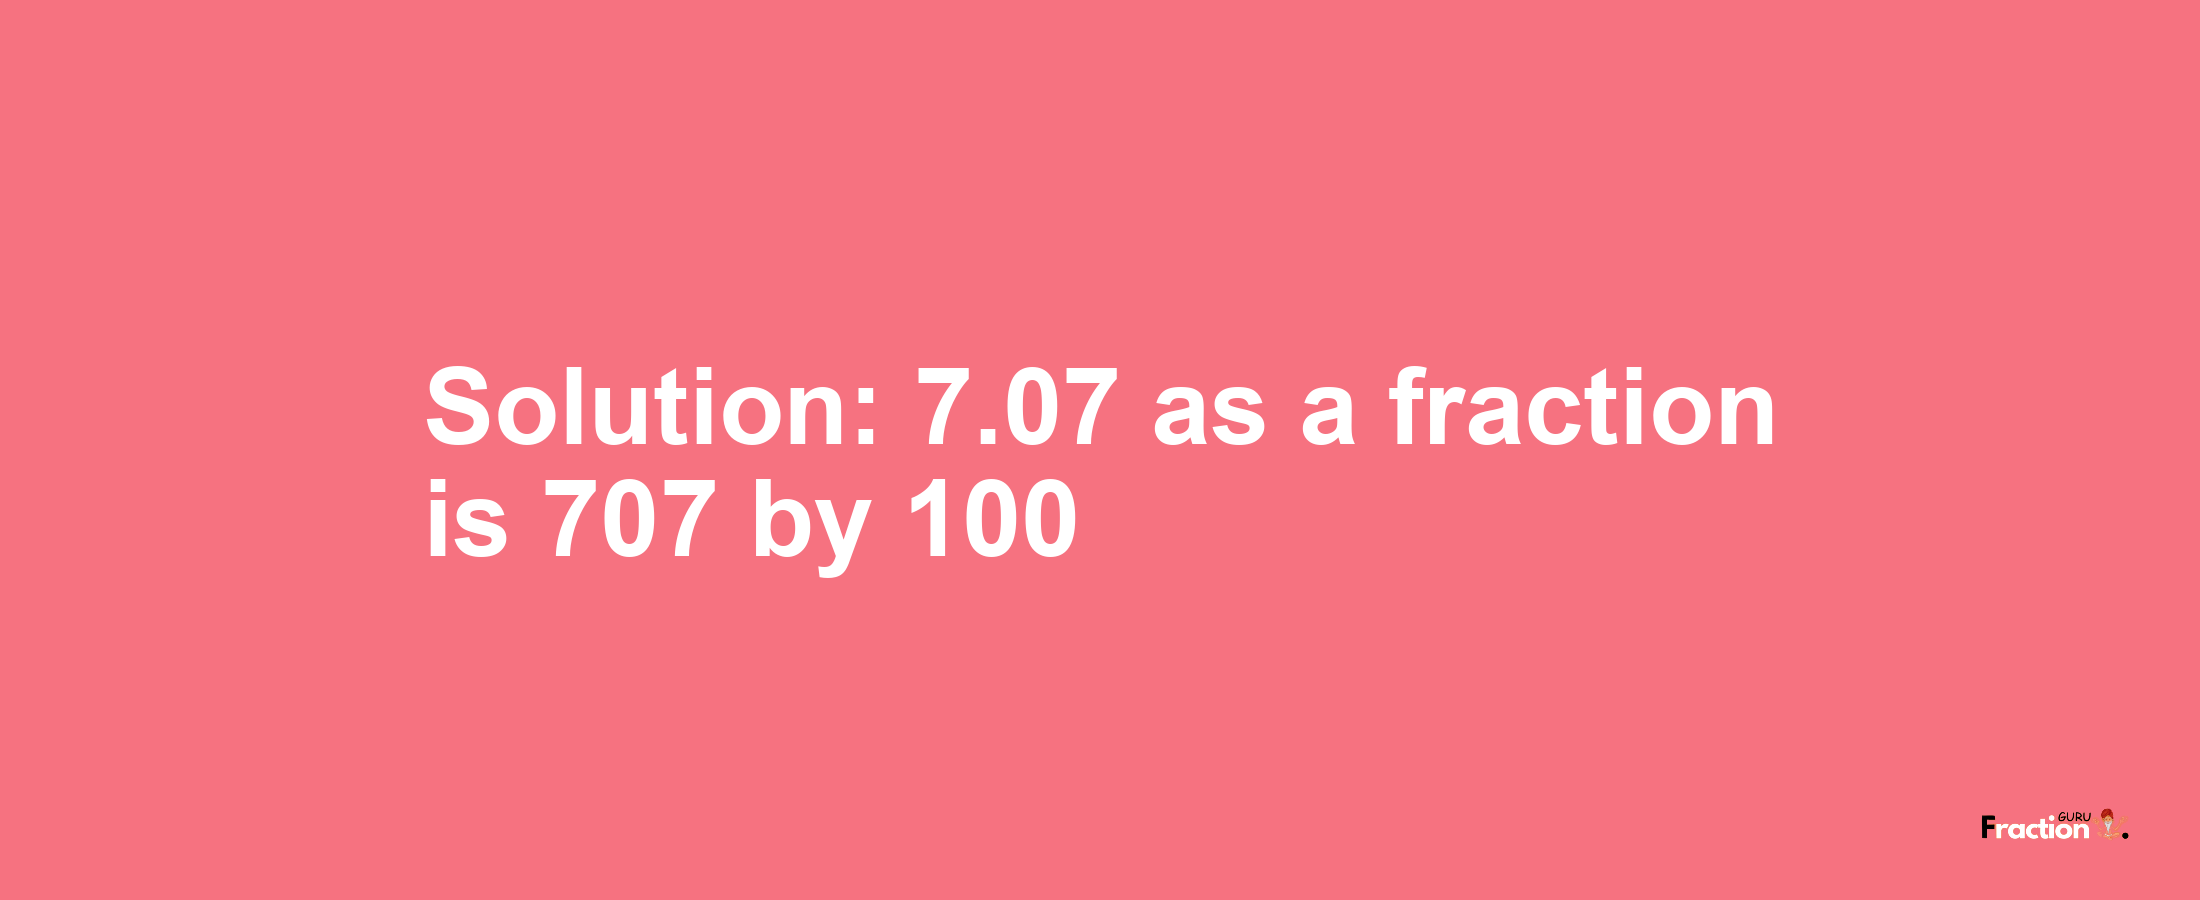 Solution:7.07 as a fraction is 707/100